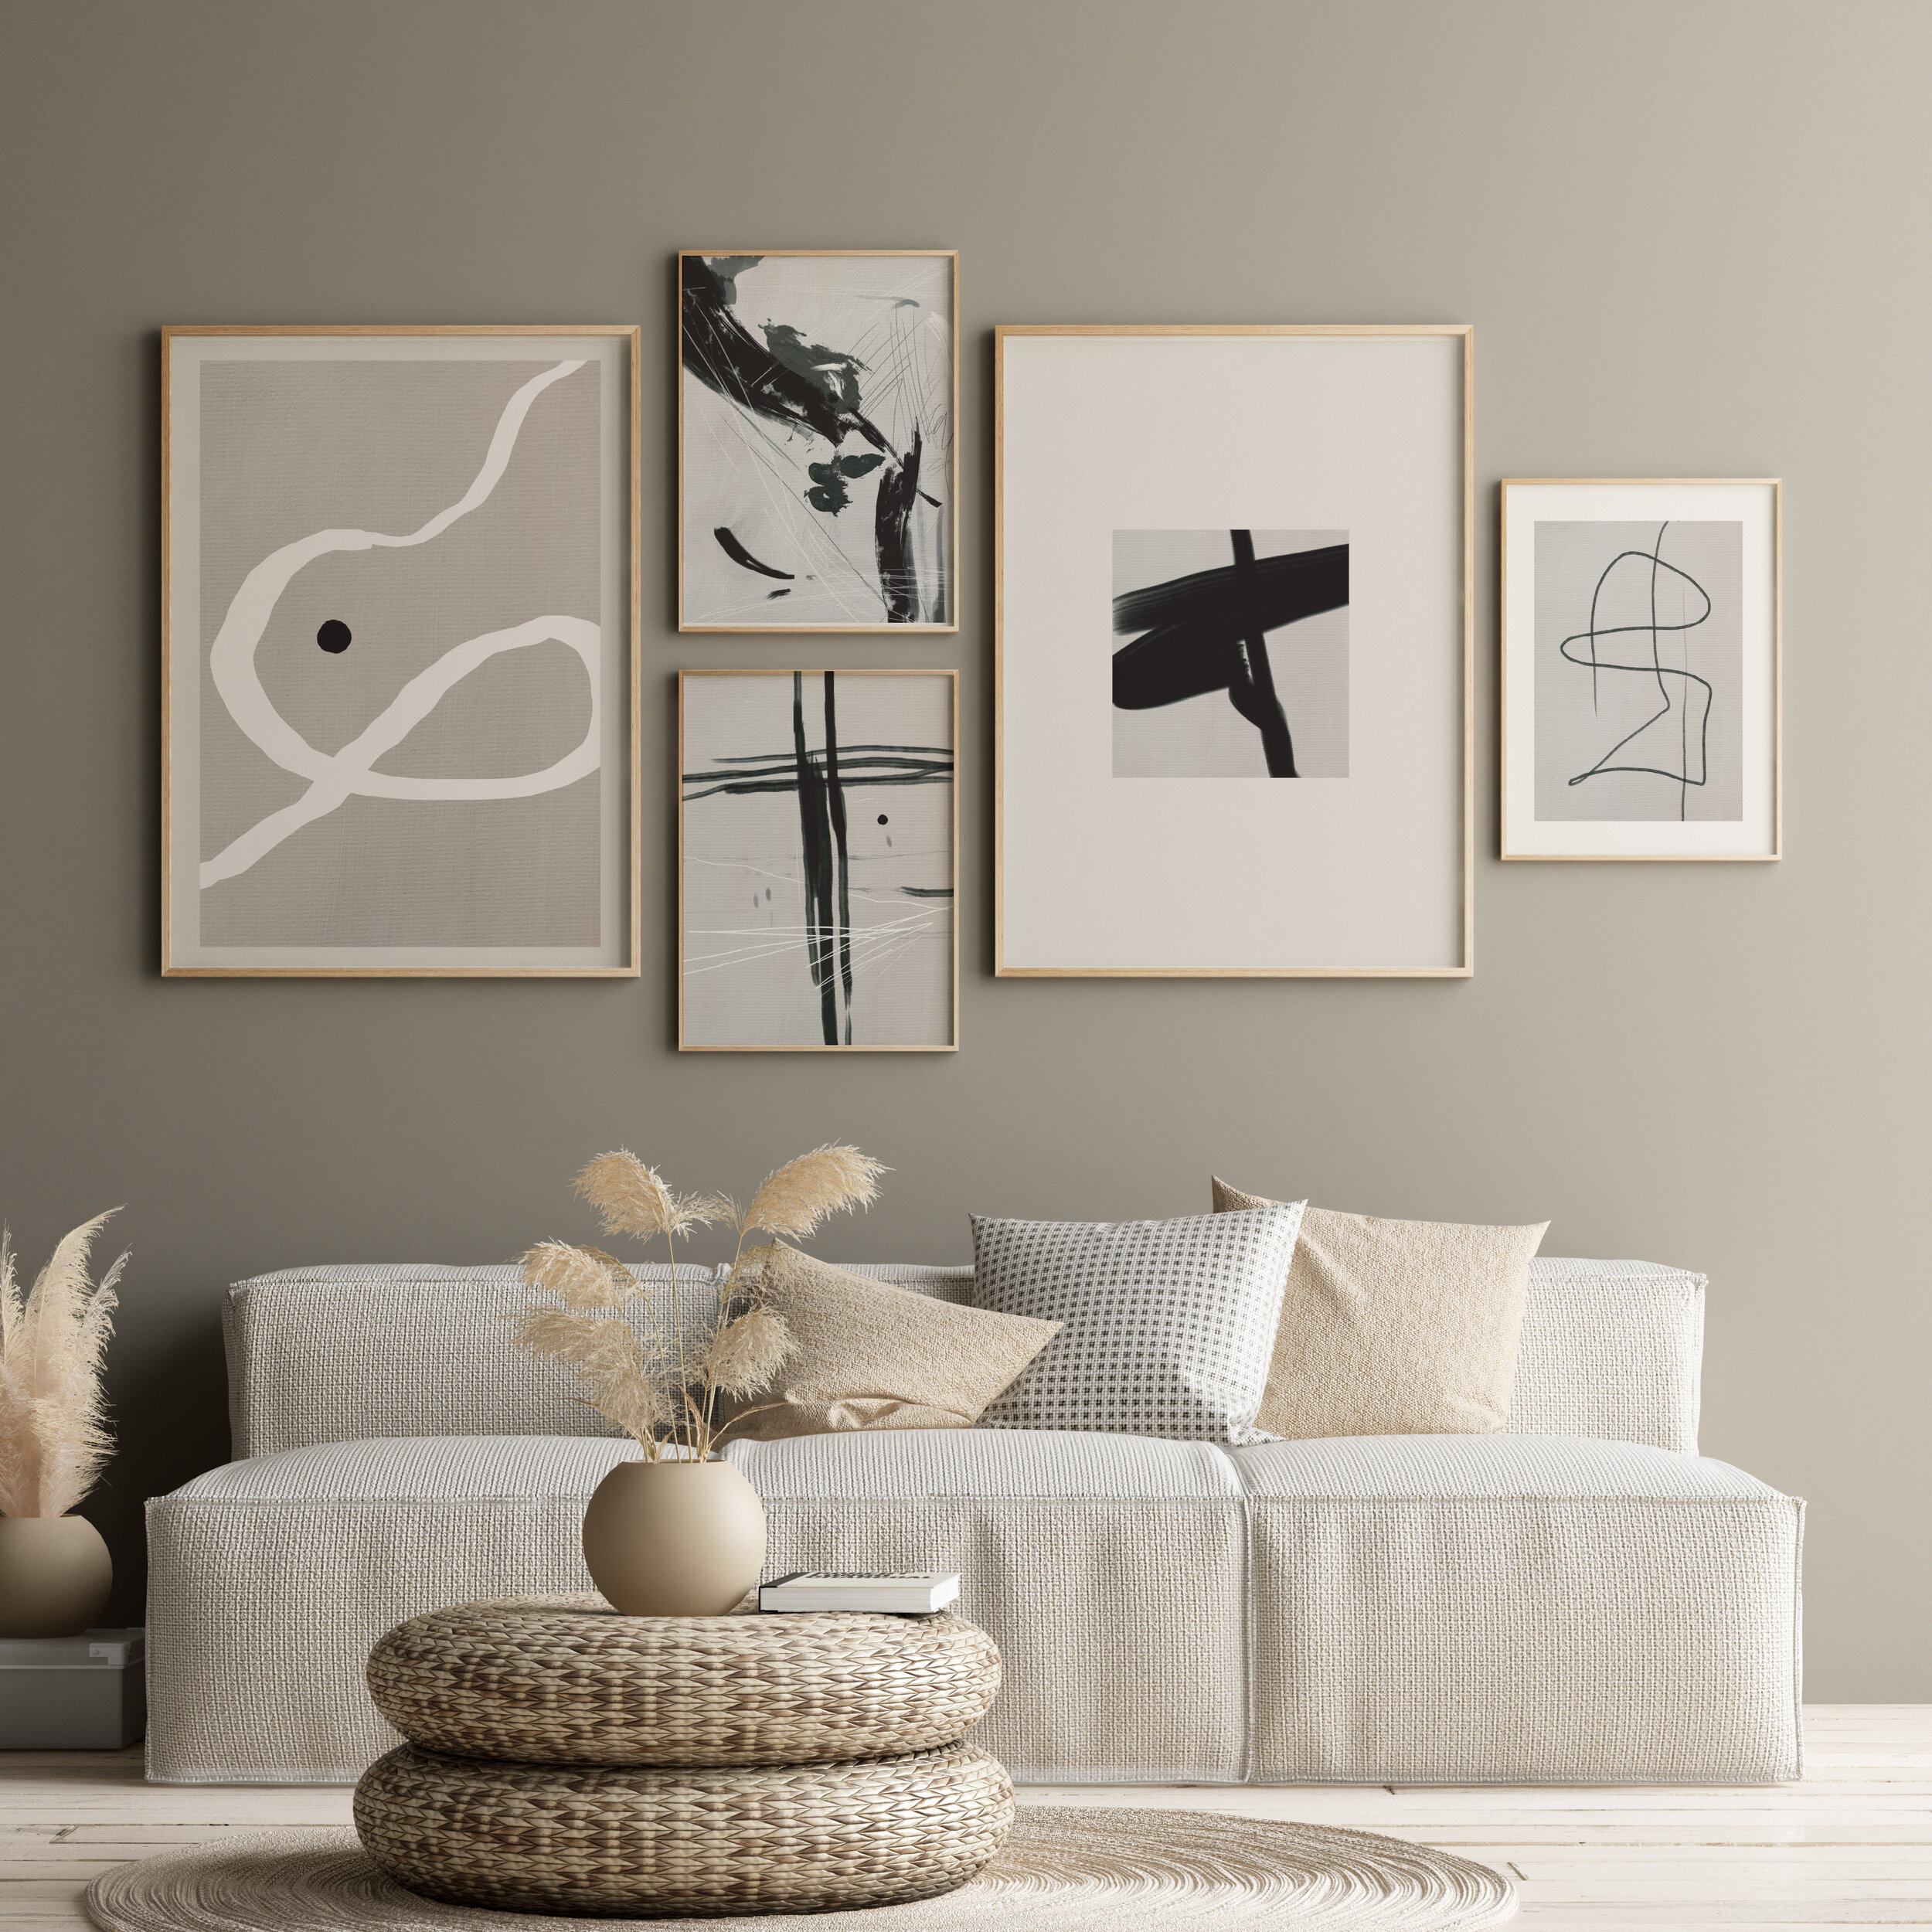 Tips & Tricks: How to create a Gallery Wall